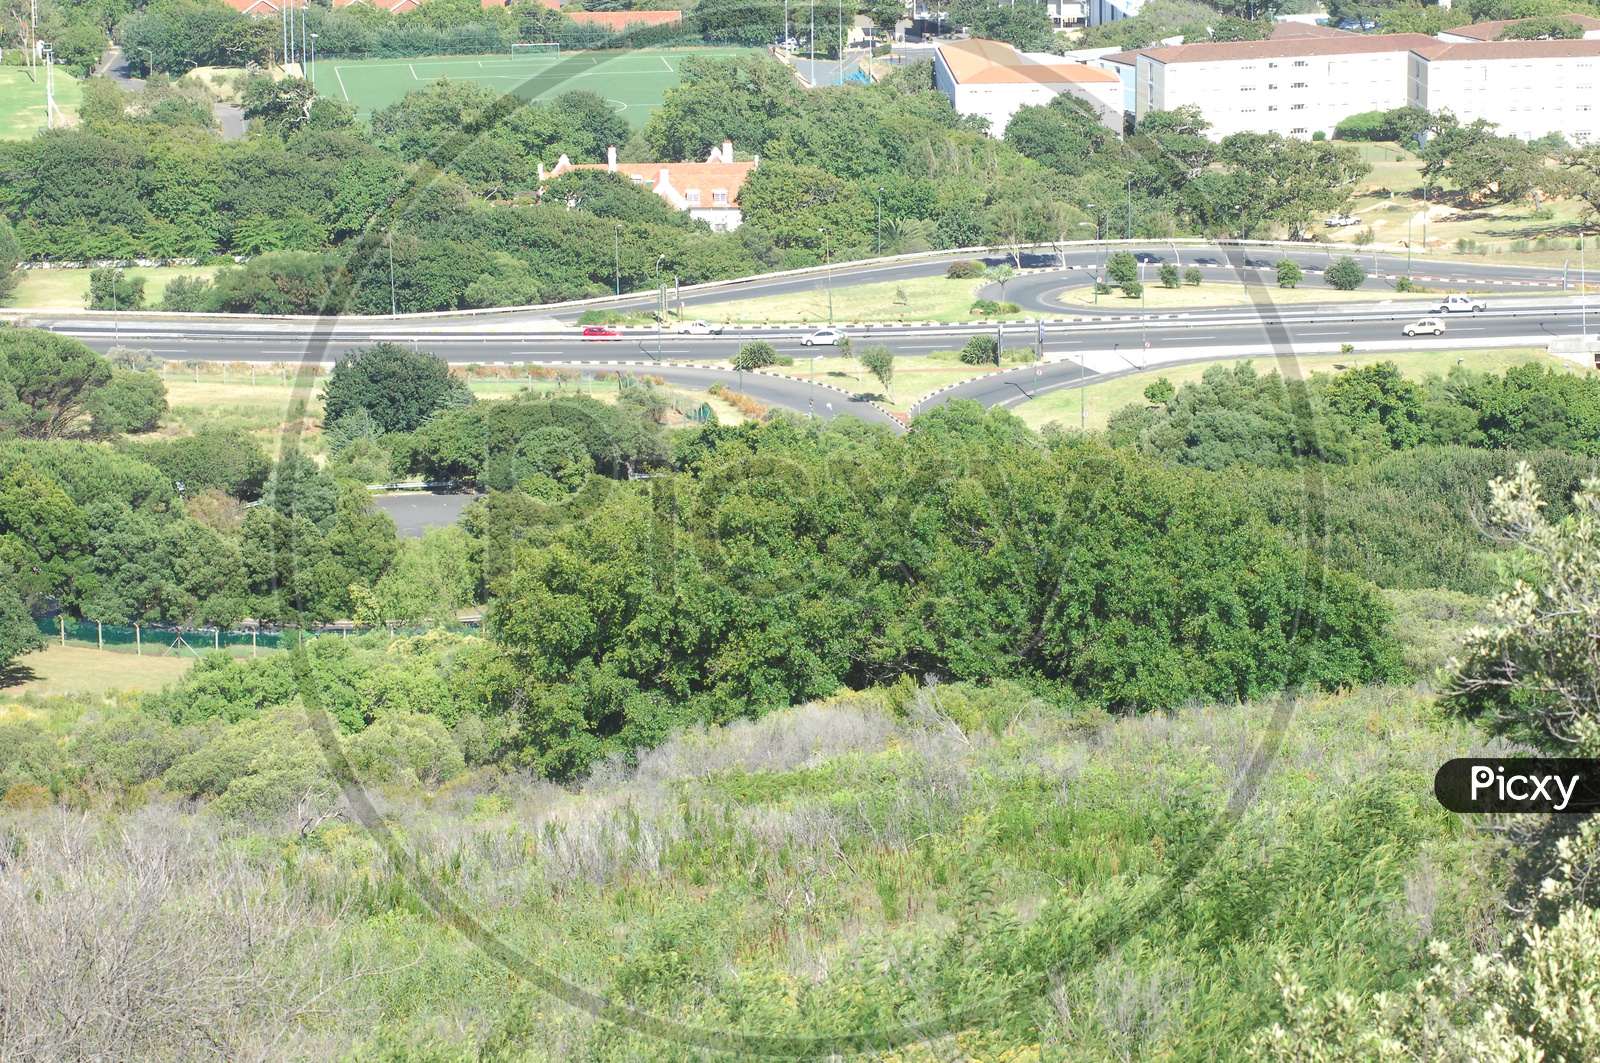 View of Highways from a hill top